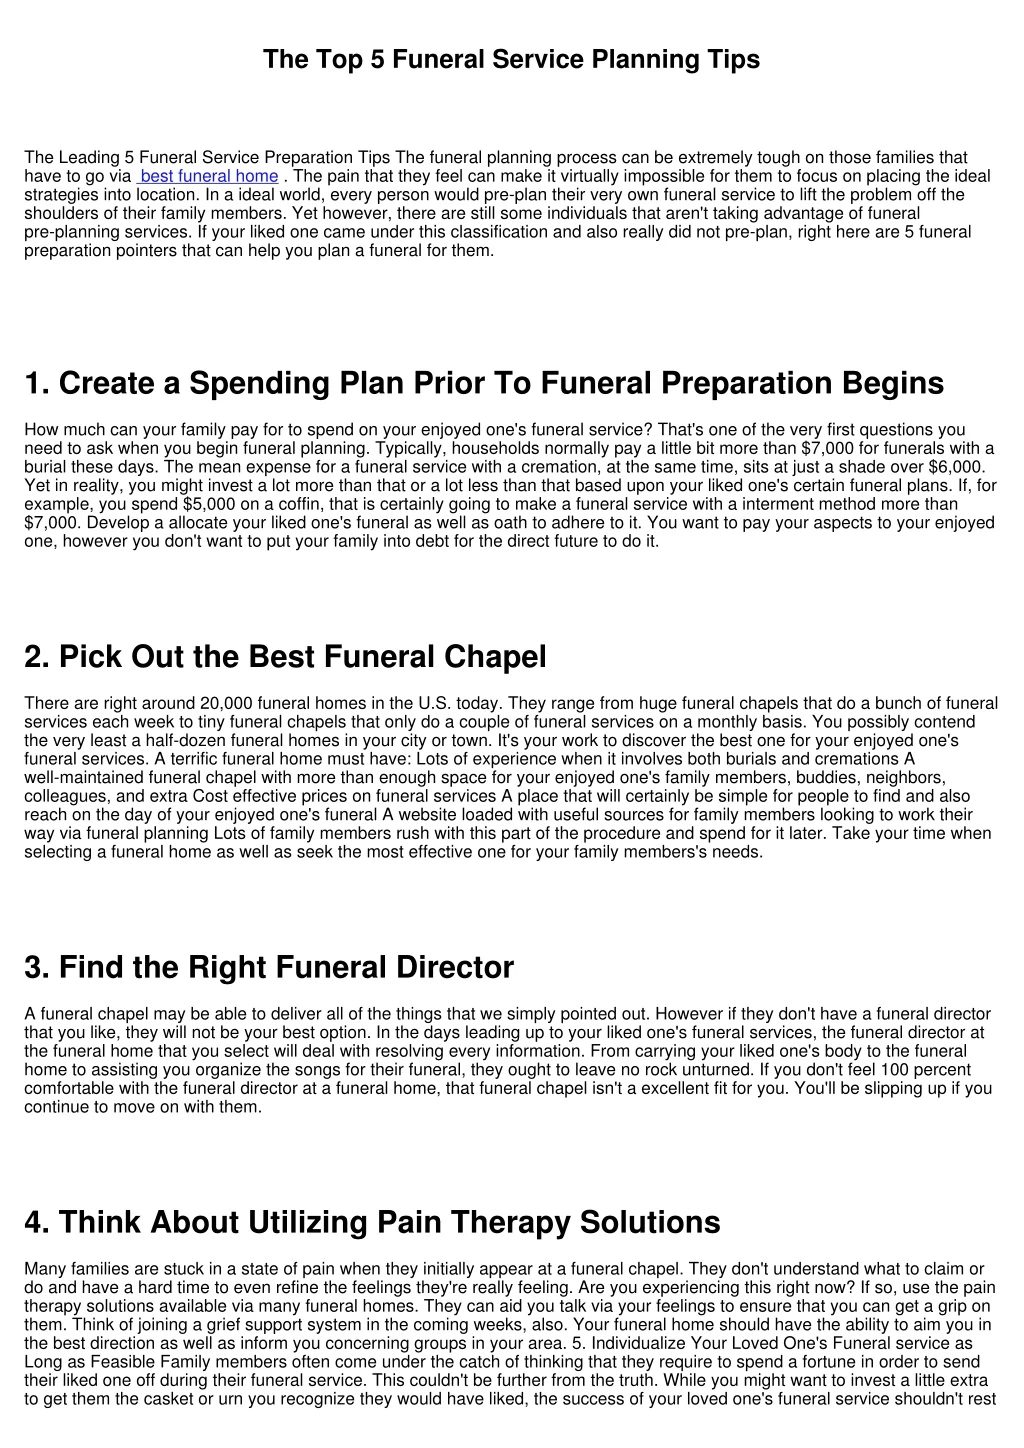 the top 5 funeral service planning tips